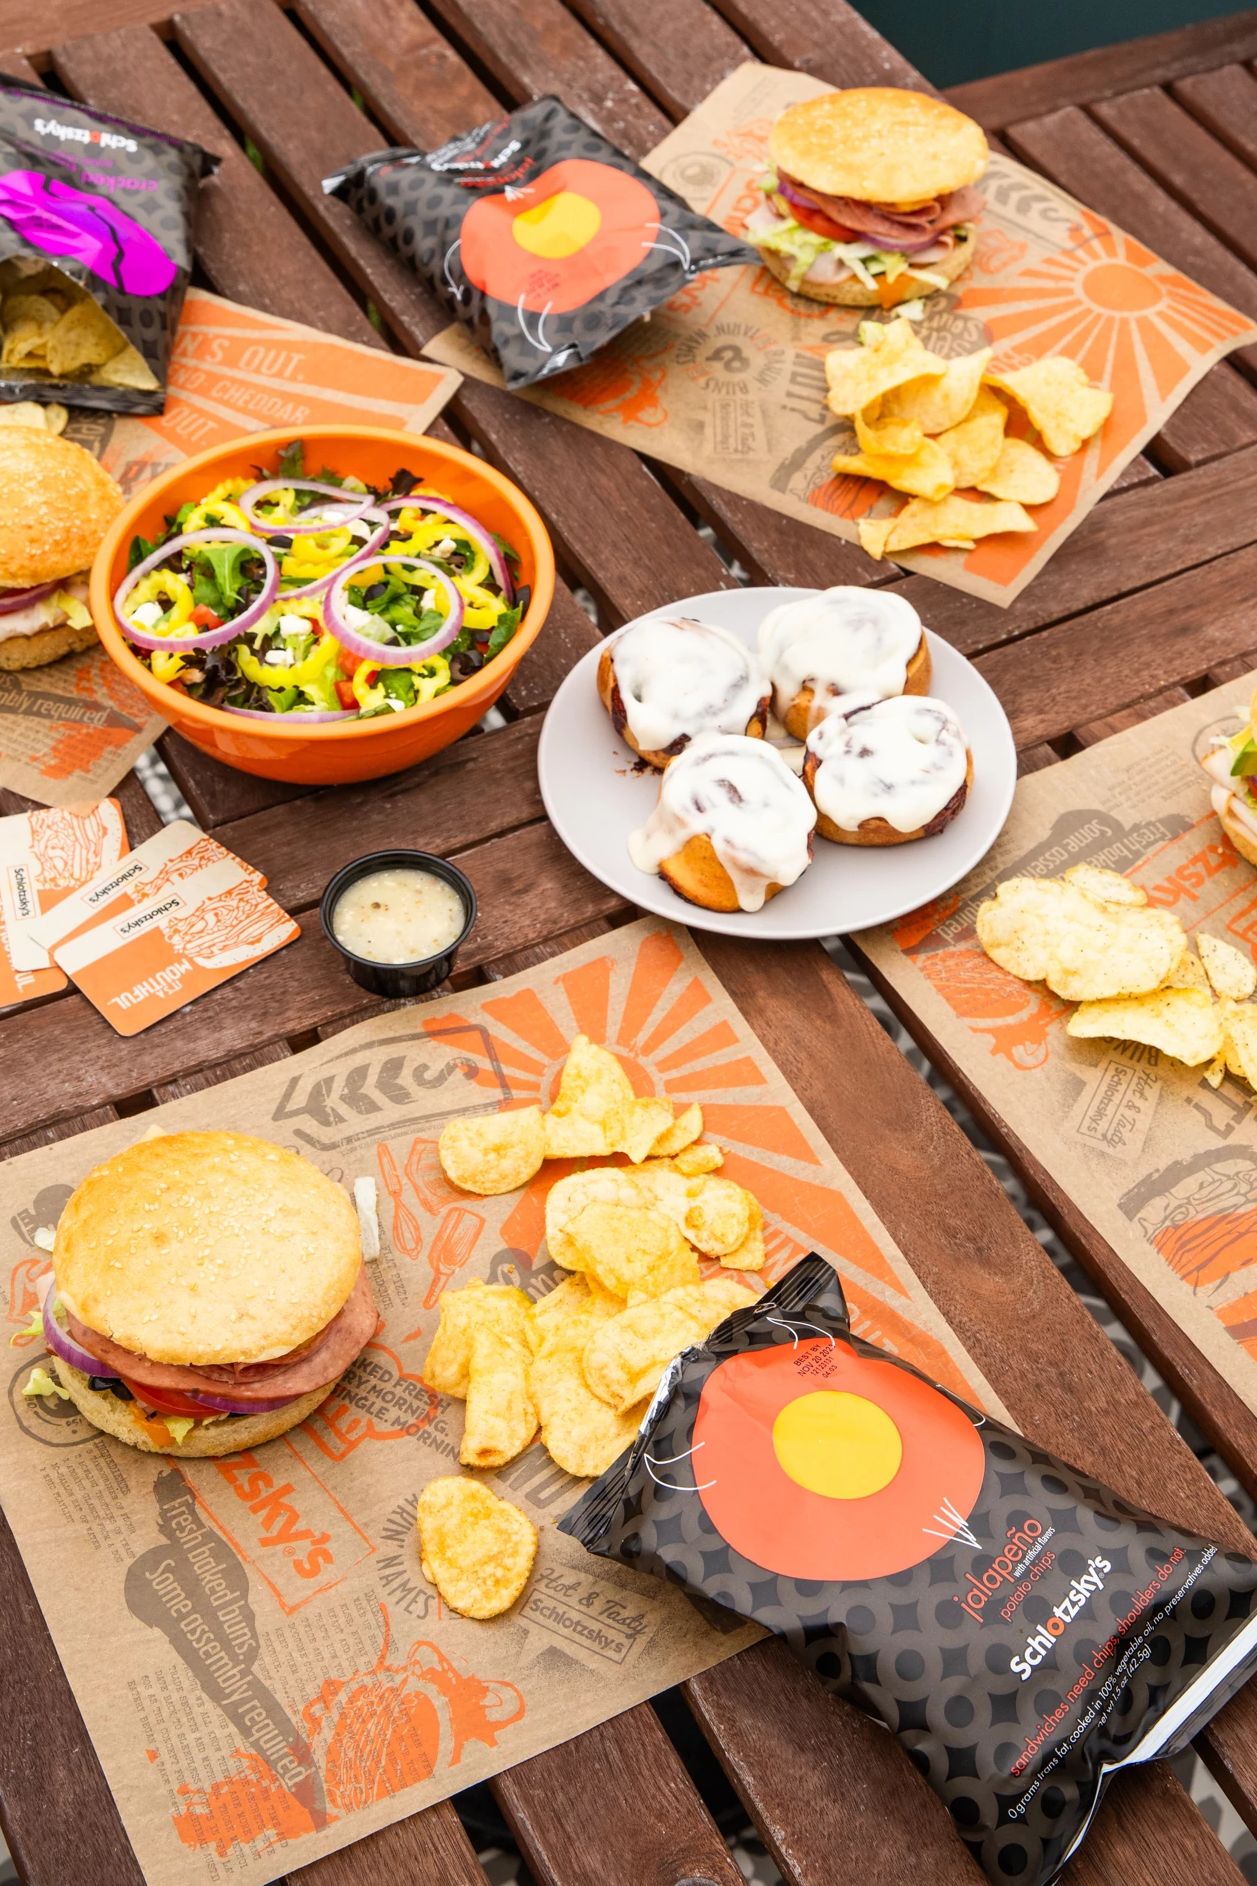 Schlotzsky's sandwiches, chips and dessert on a picnic table